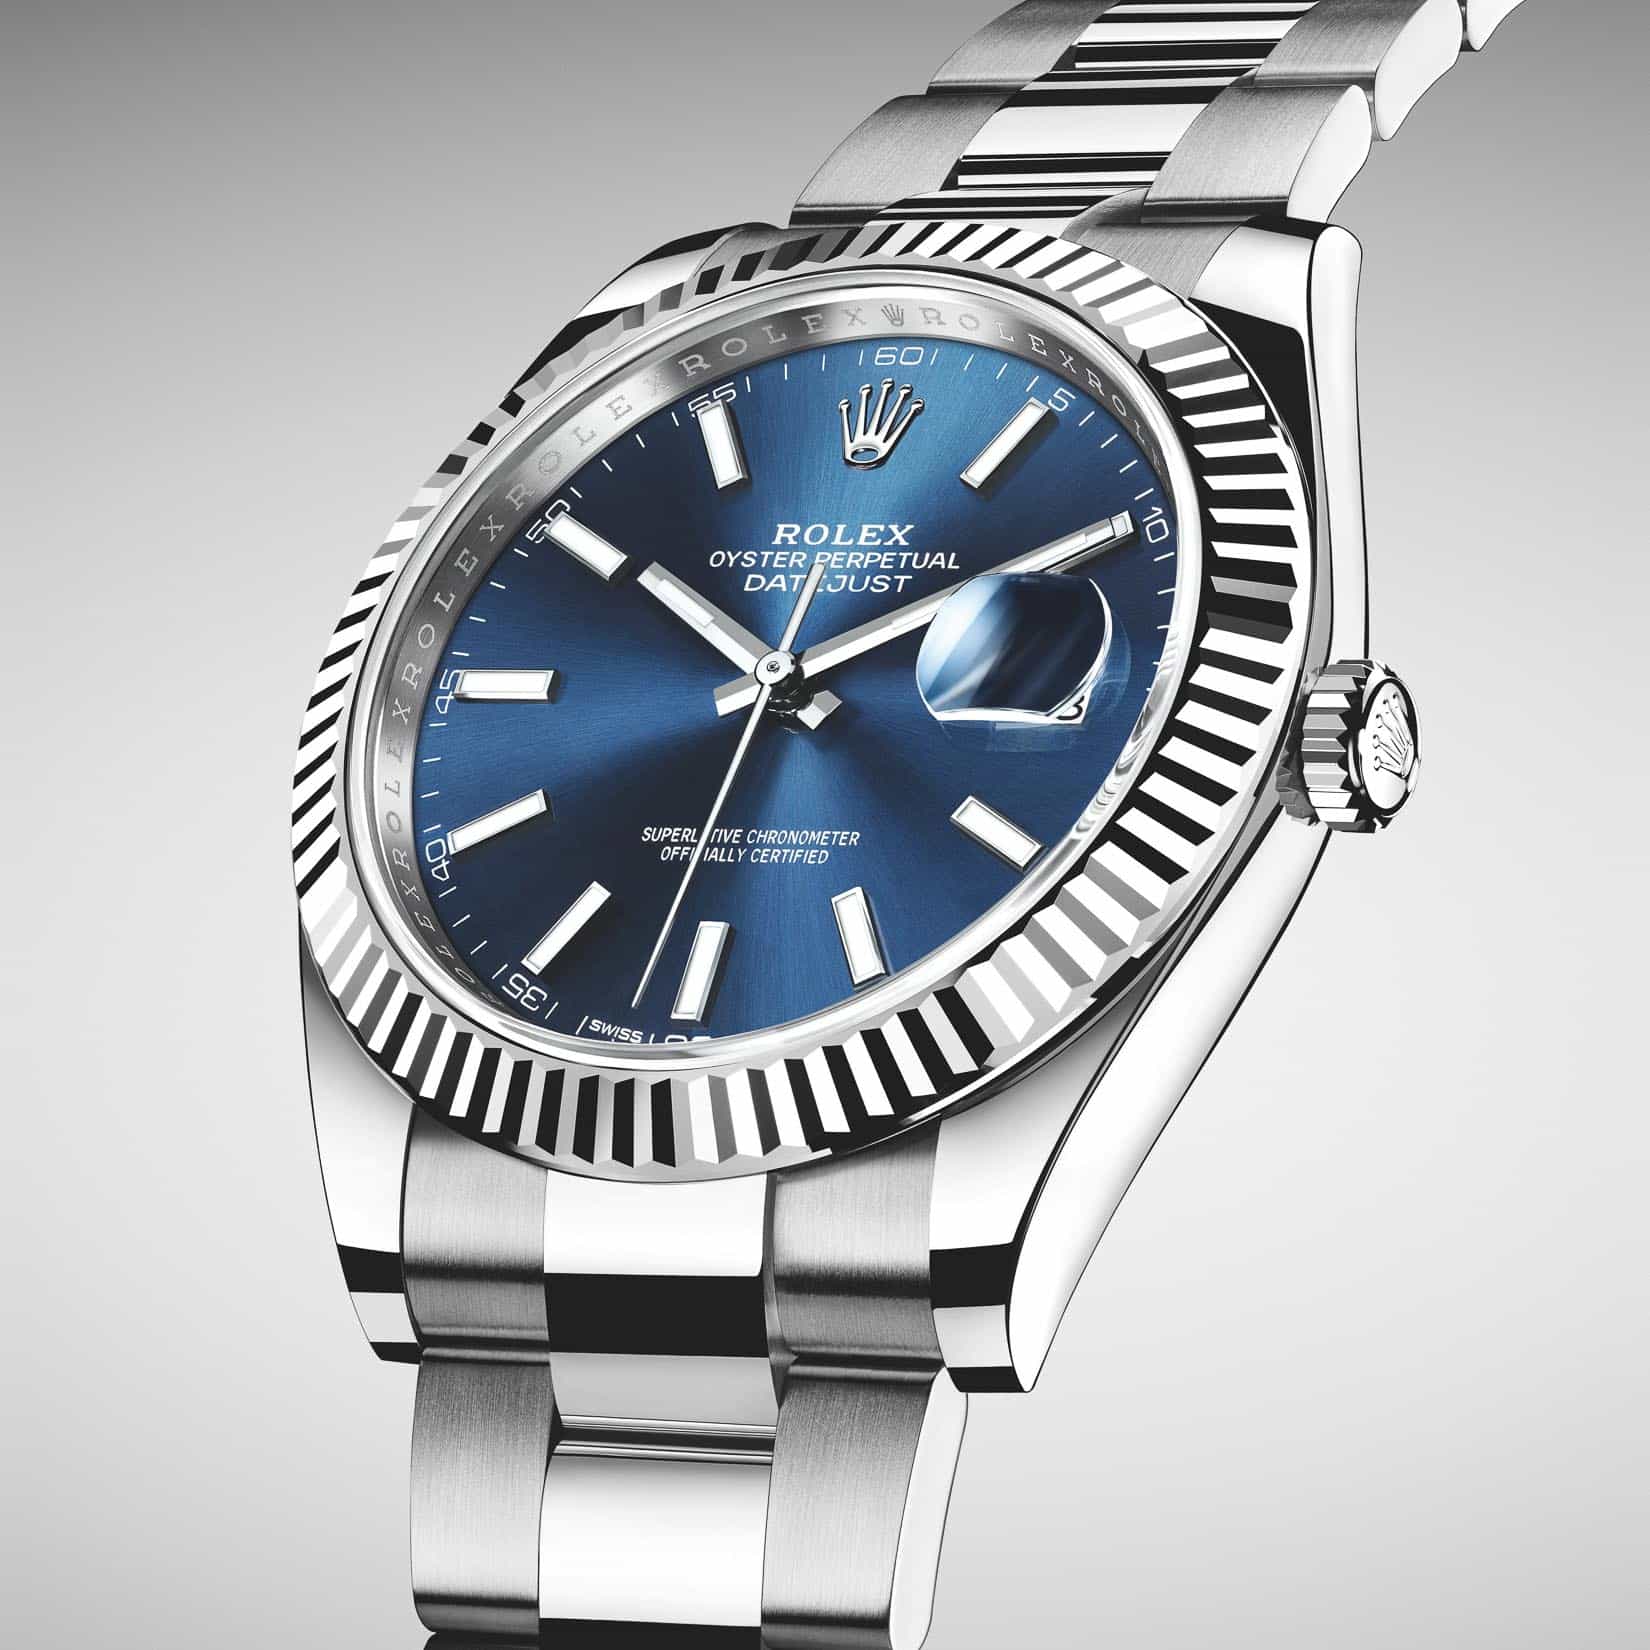 The New Rolex Datejust 41 in Steel and White Gold